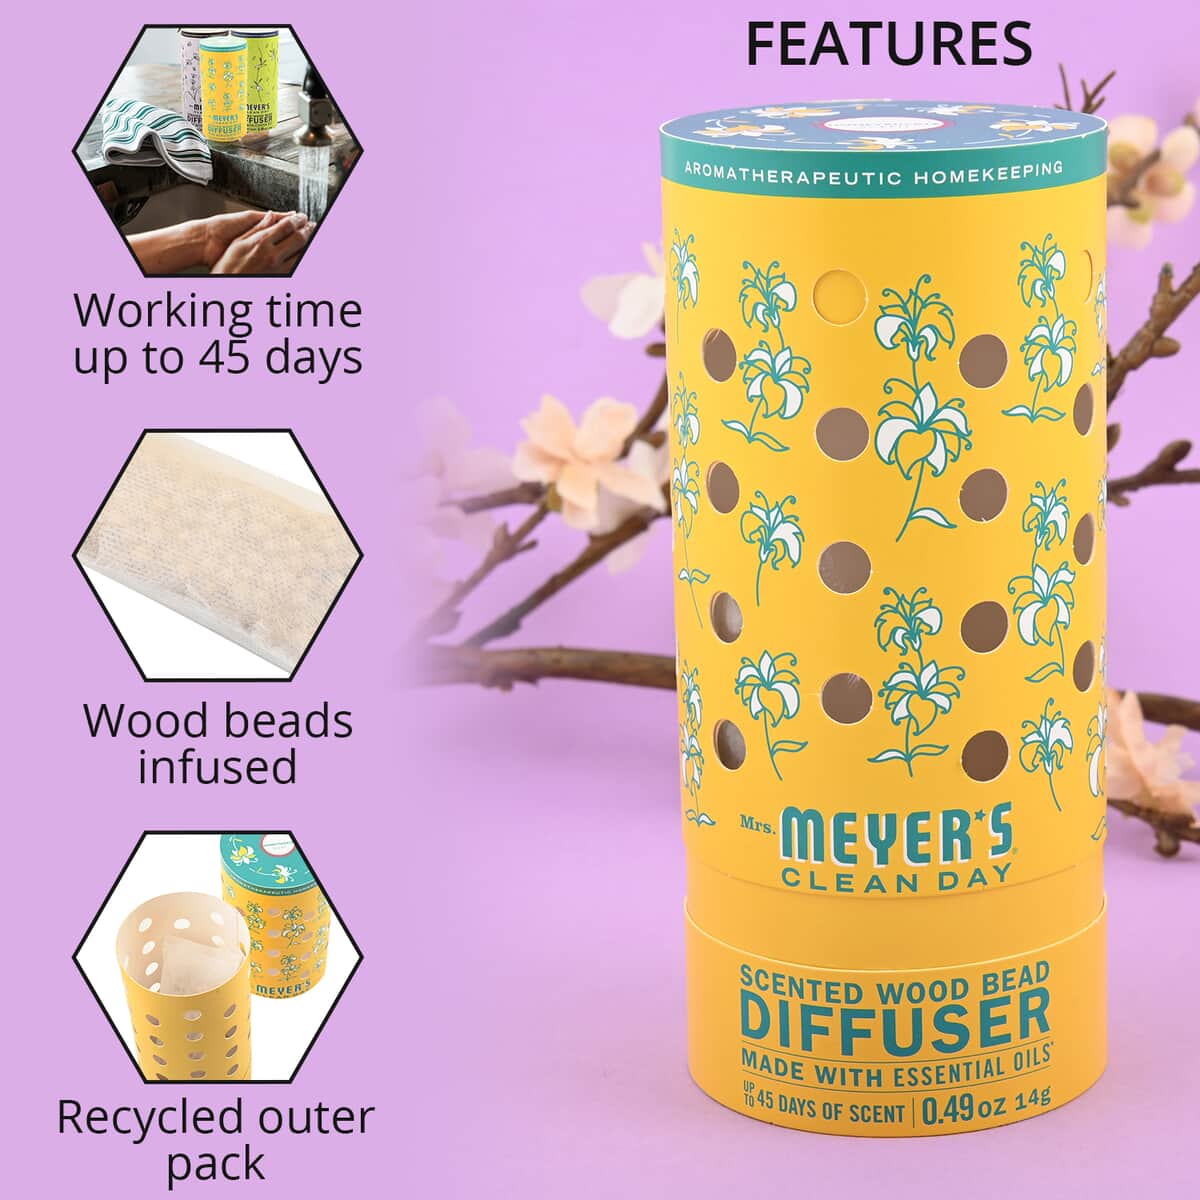 Mrs. Meyer's Clean Day Scented Wood Bead Diffuser Honeysuckle - 0.49oz  image number 1